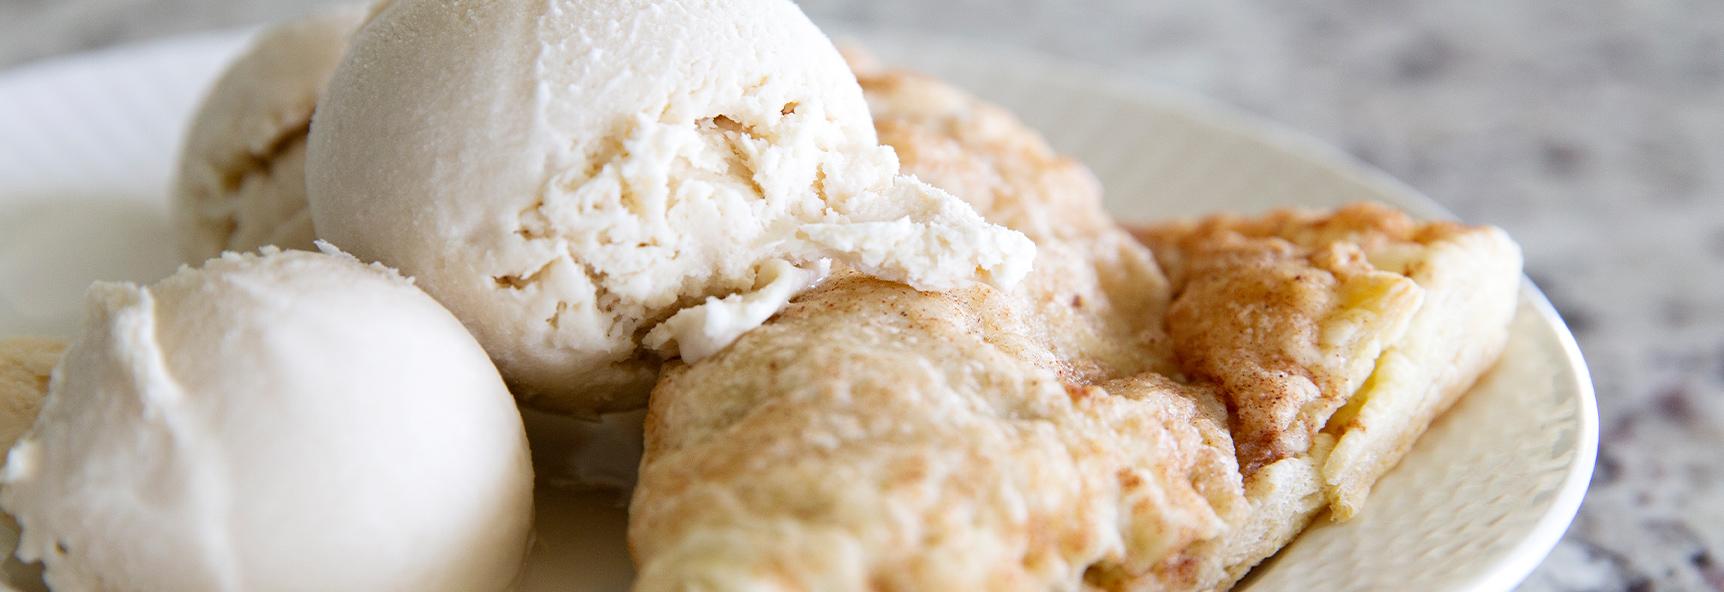 Featured image for “Bourbon Apple-Pear Turnovers”